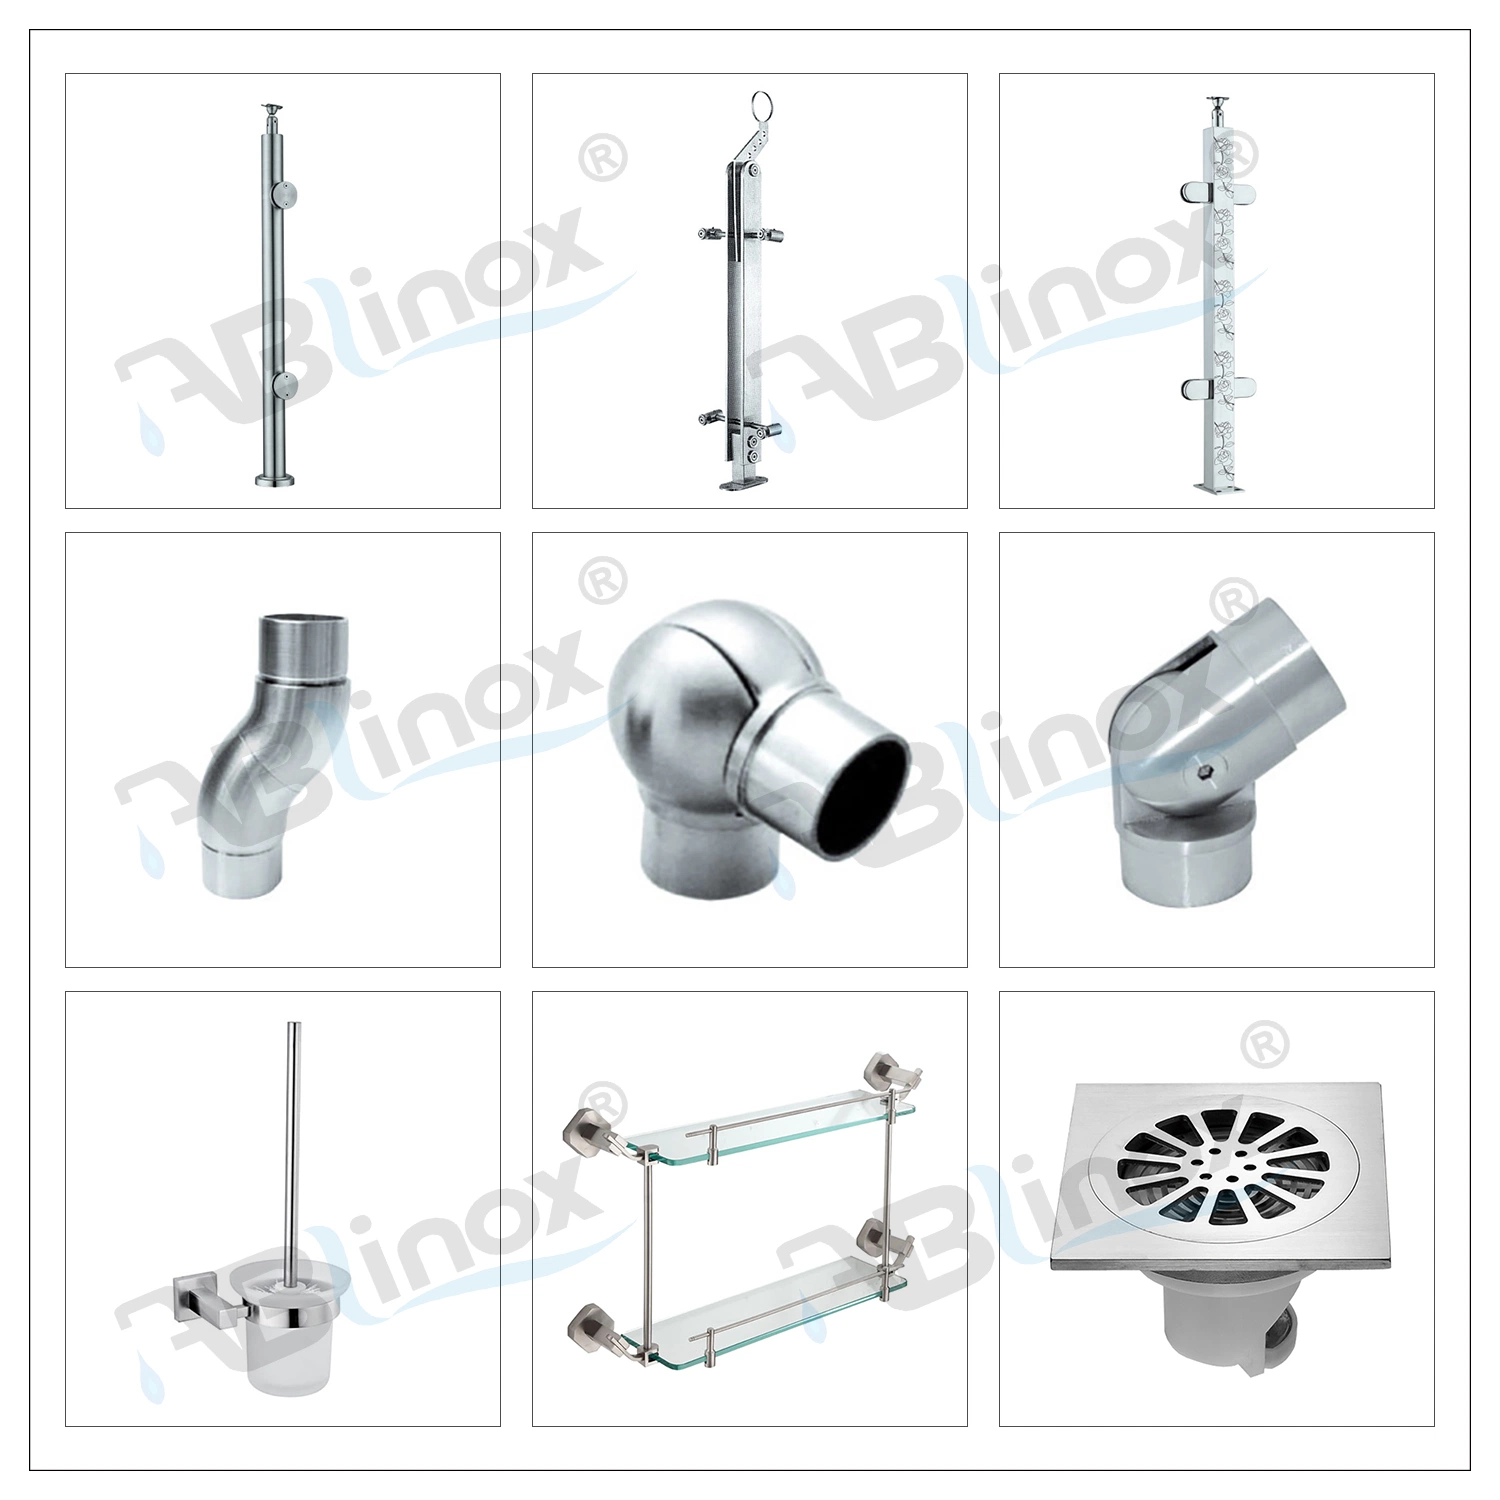 Handrail Parts 304 Stainless Steel Seamless Construction Square Pipe/Tube